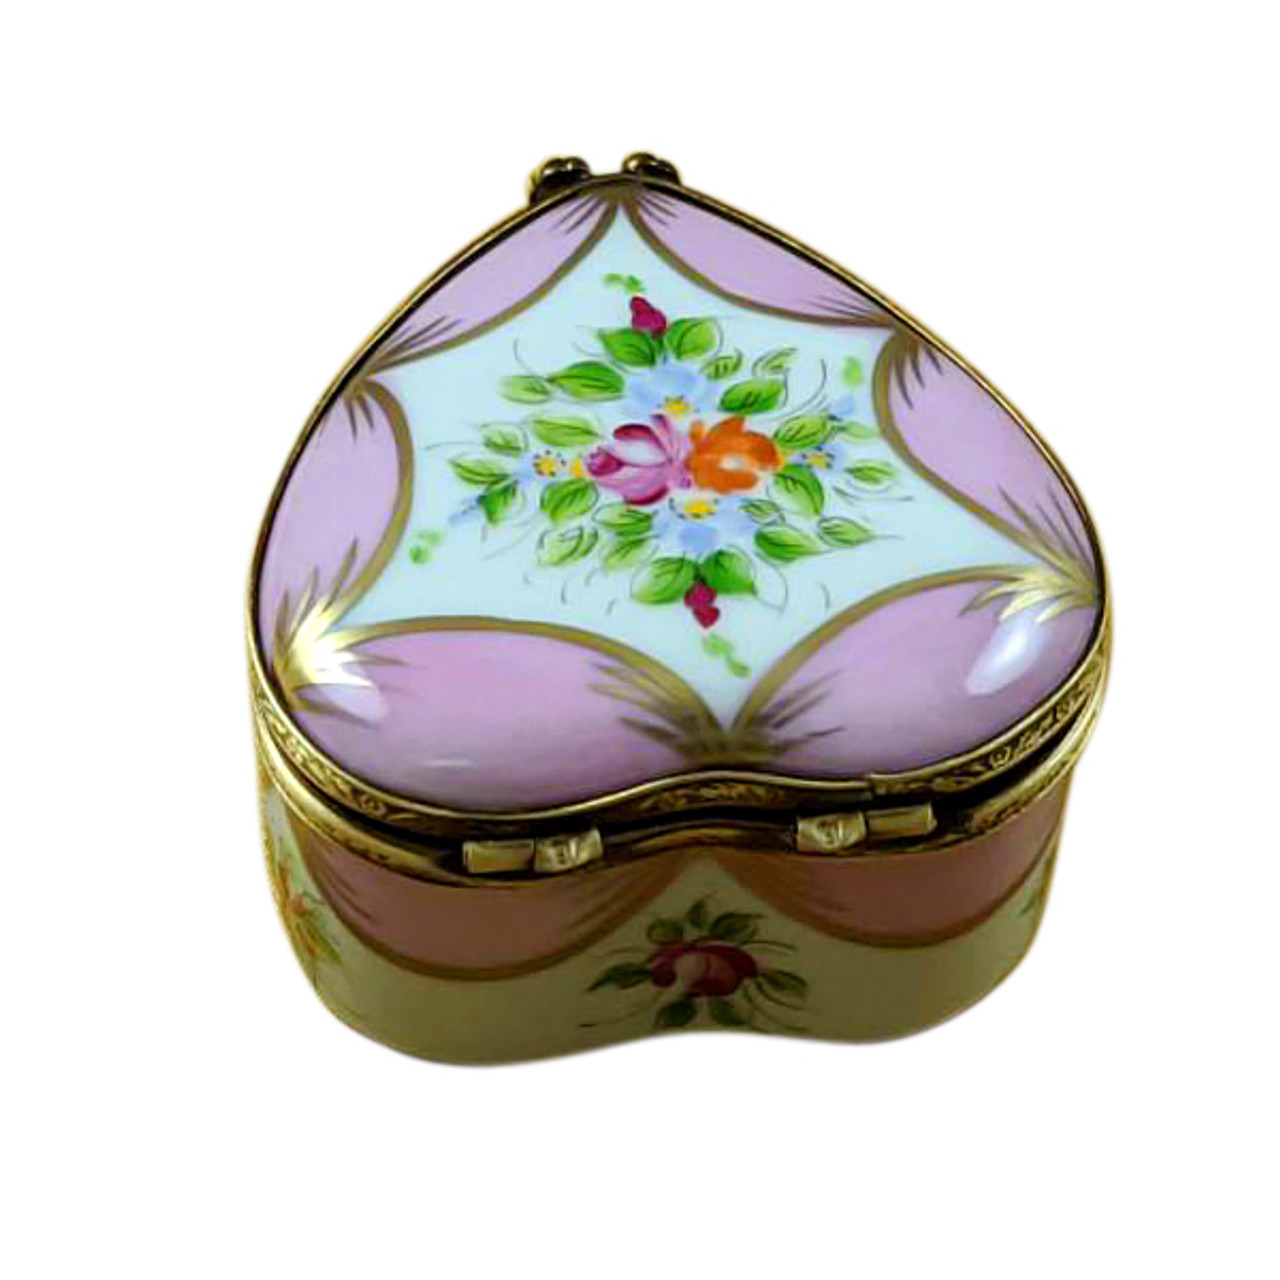 Pink Heart with Flowers Limoges Box - RH241